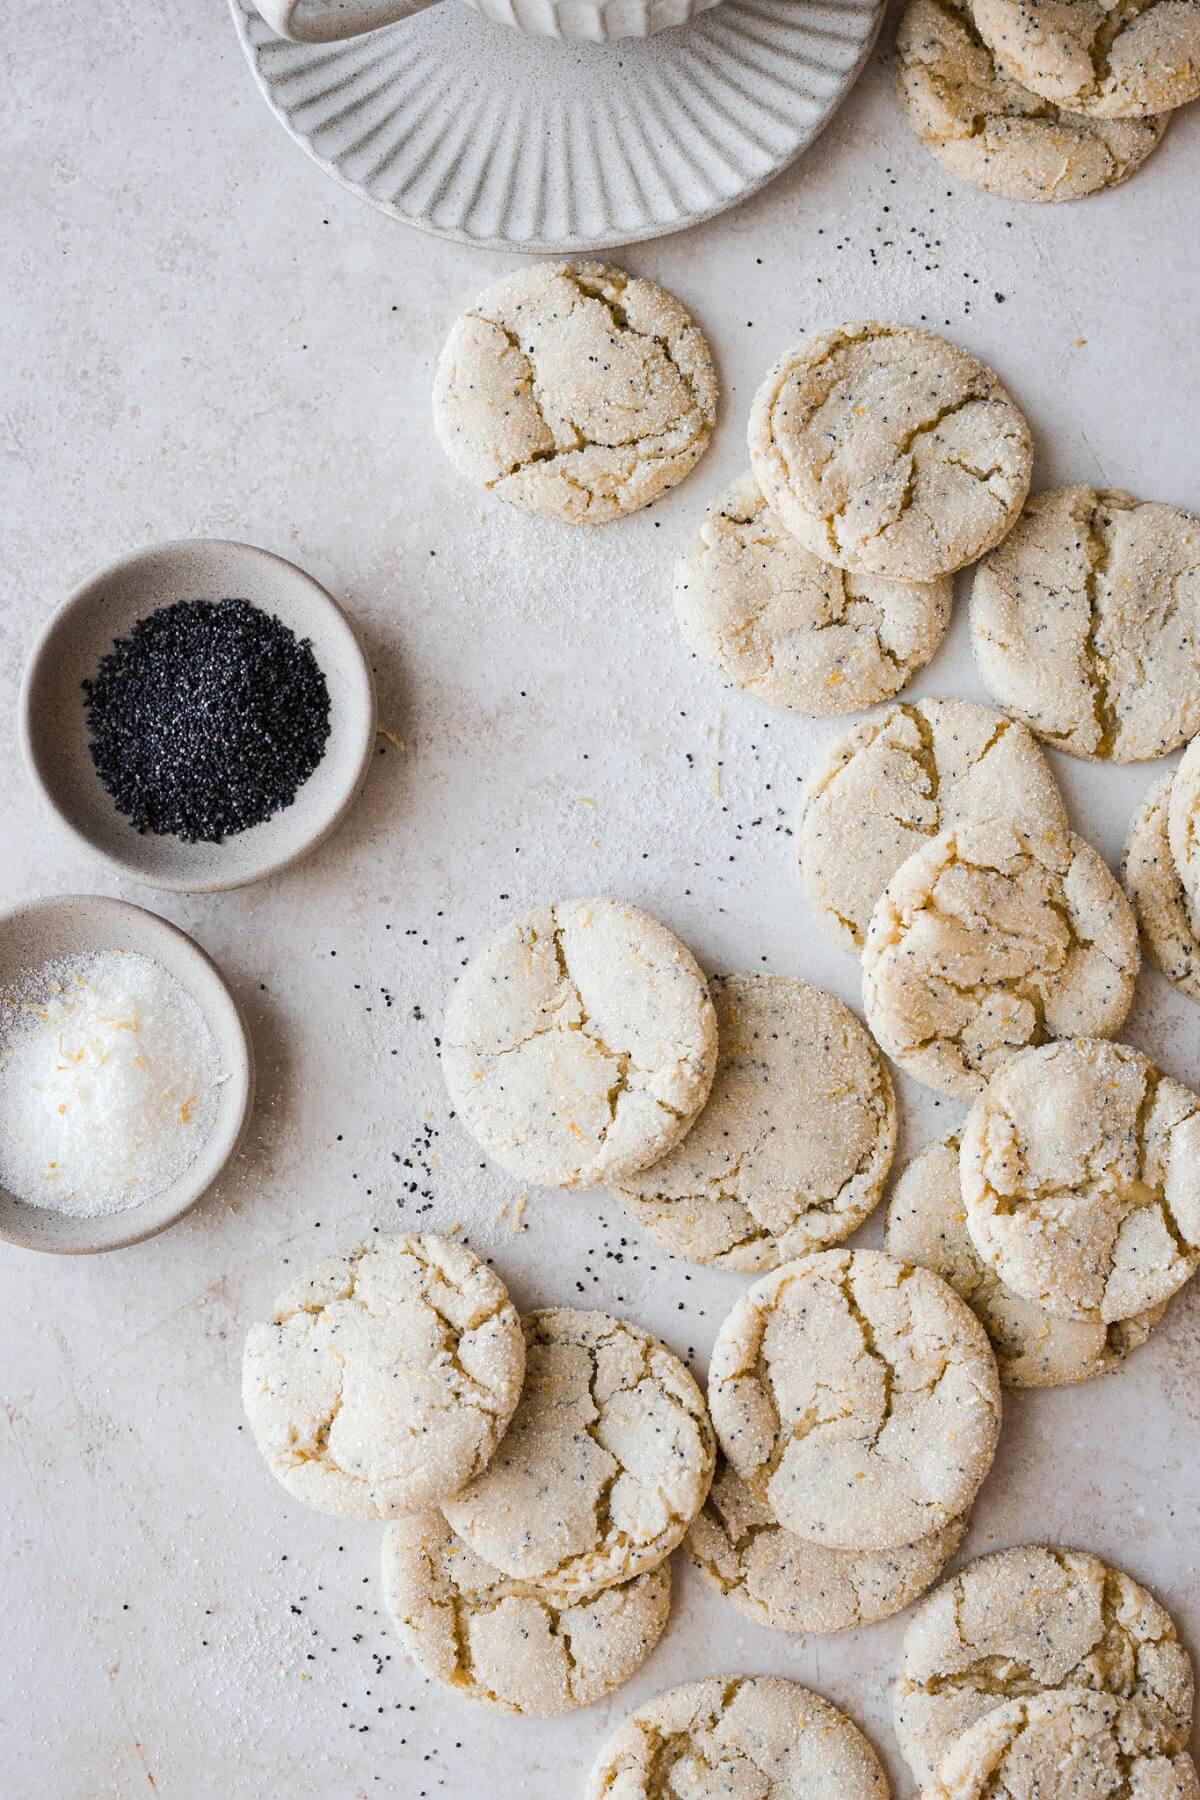 Lemon poppy seed cookies next to bowls of poppy seeds and lemon sugar.